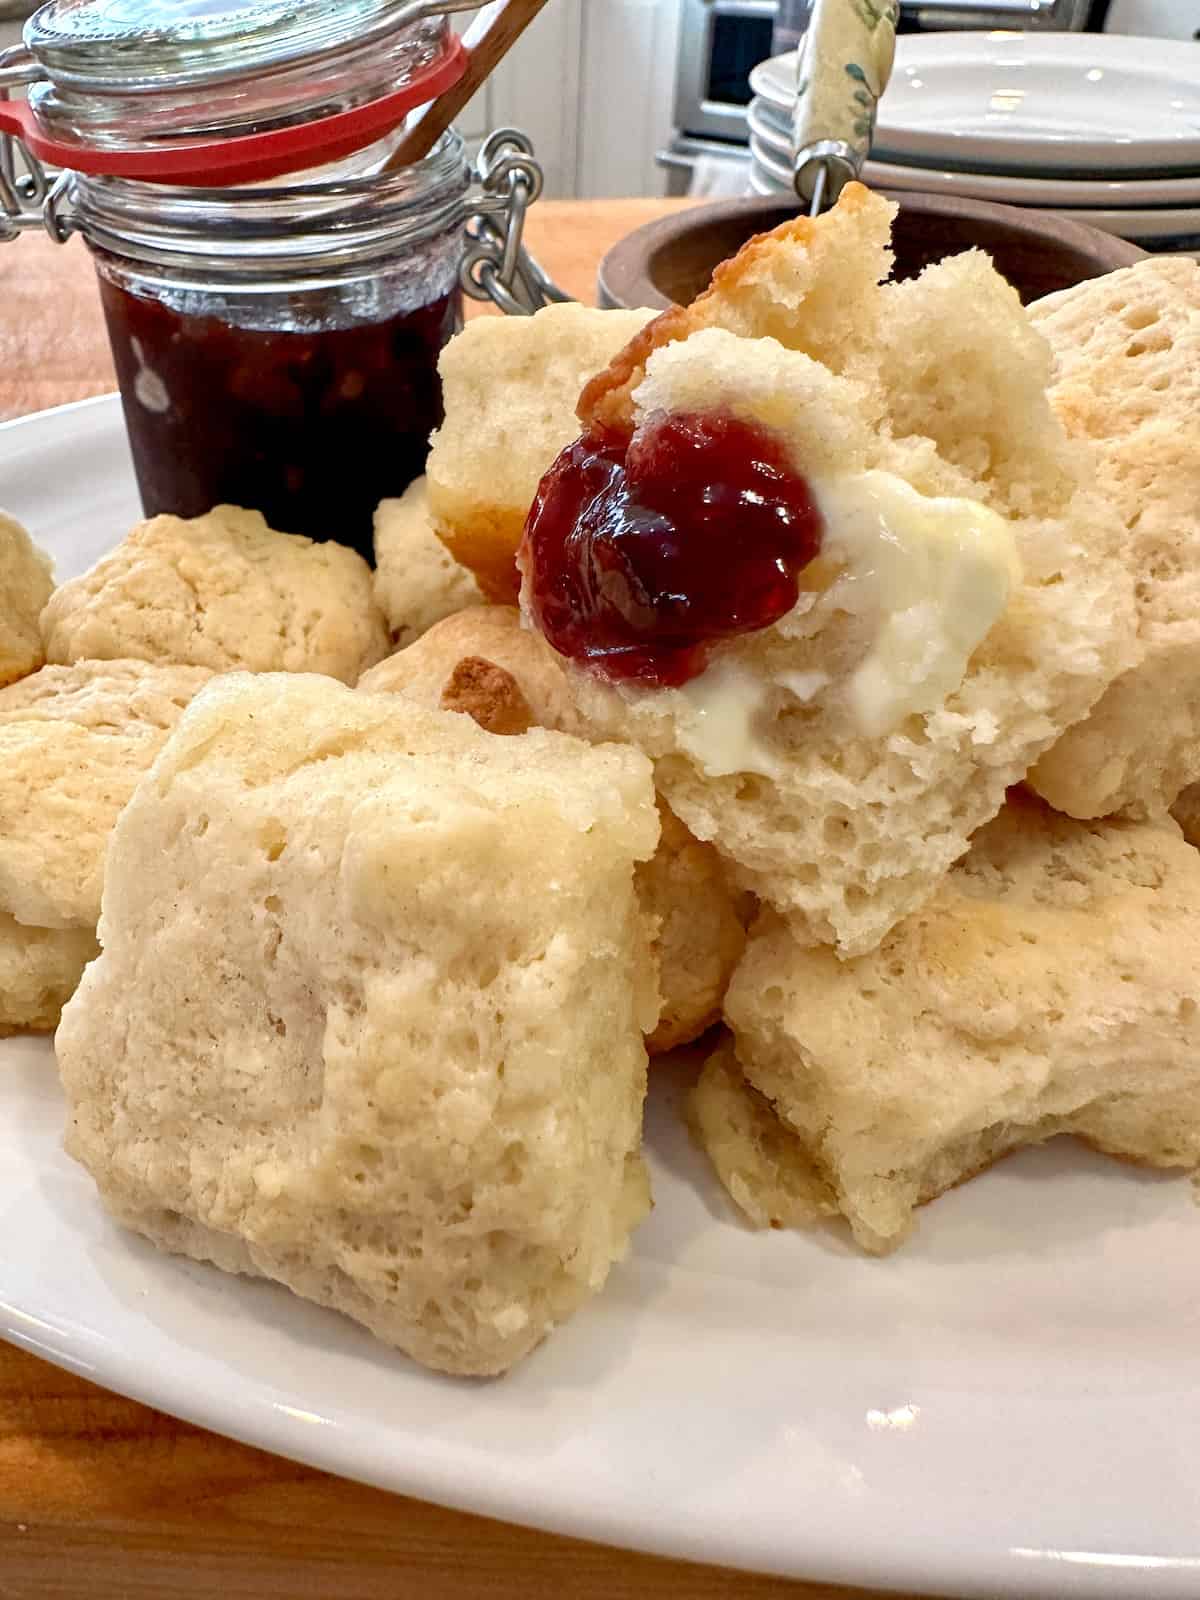 Biscuits on a plate with a portion of jam on one biscuit and a jar of jam.